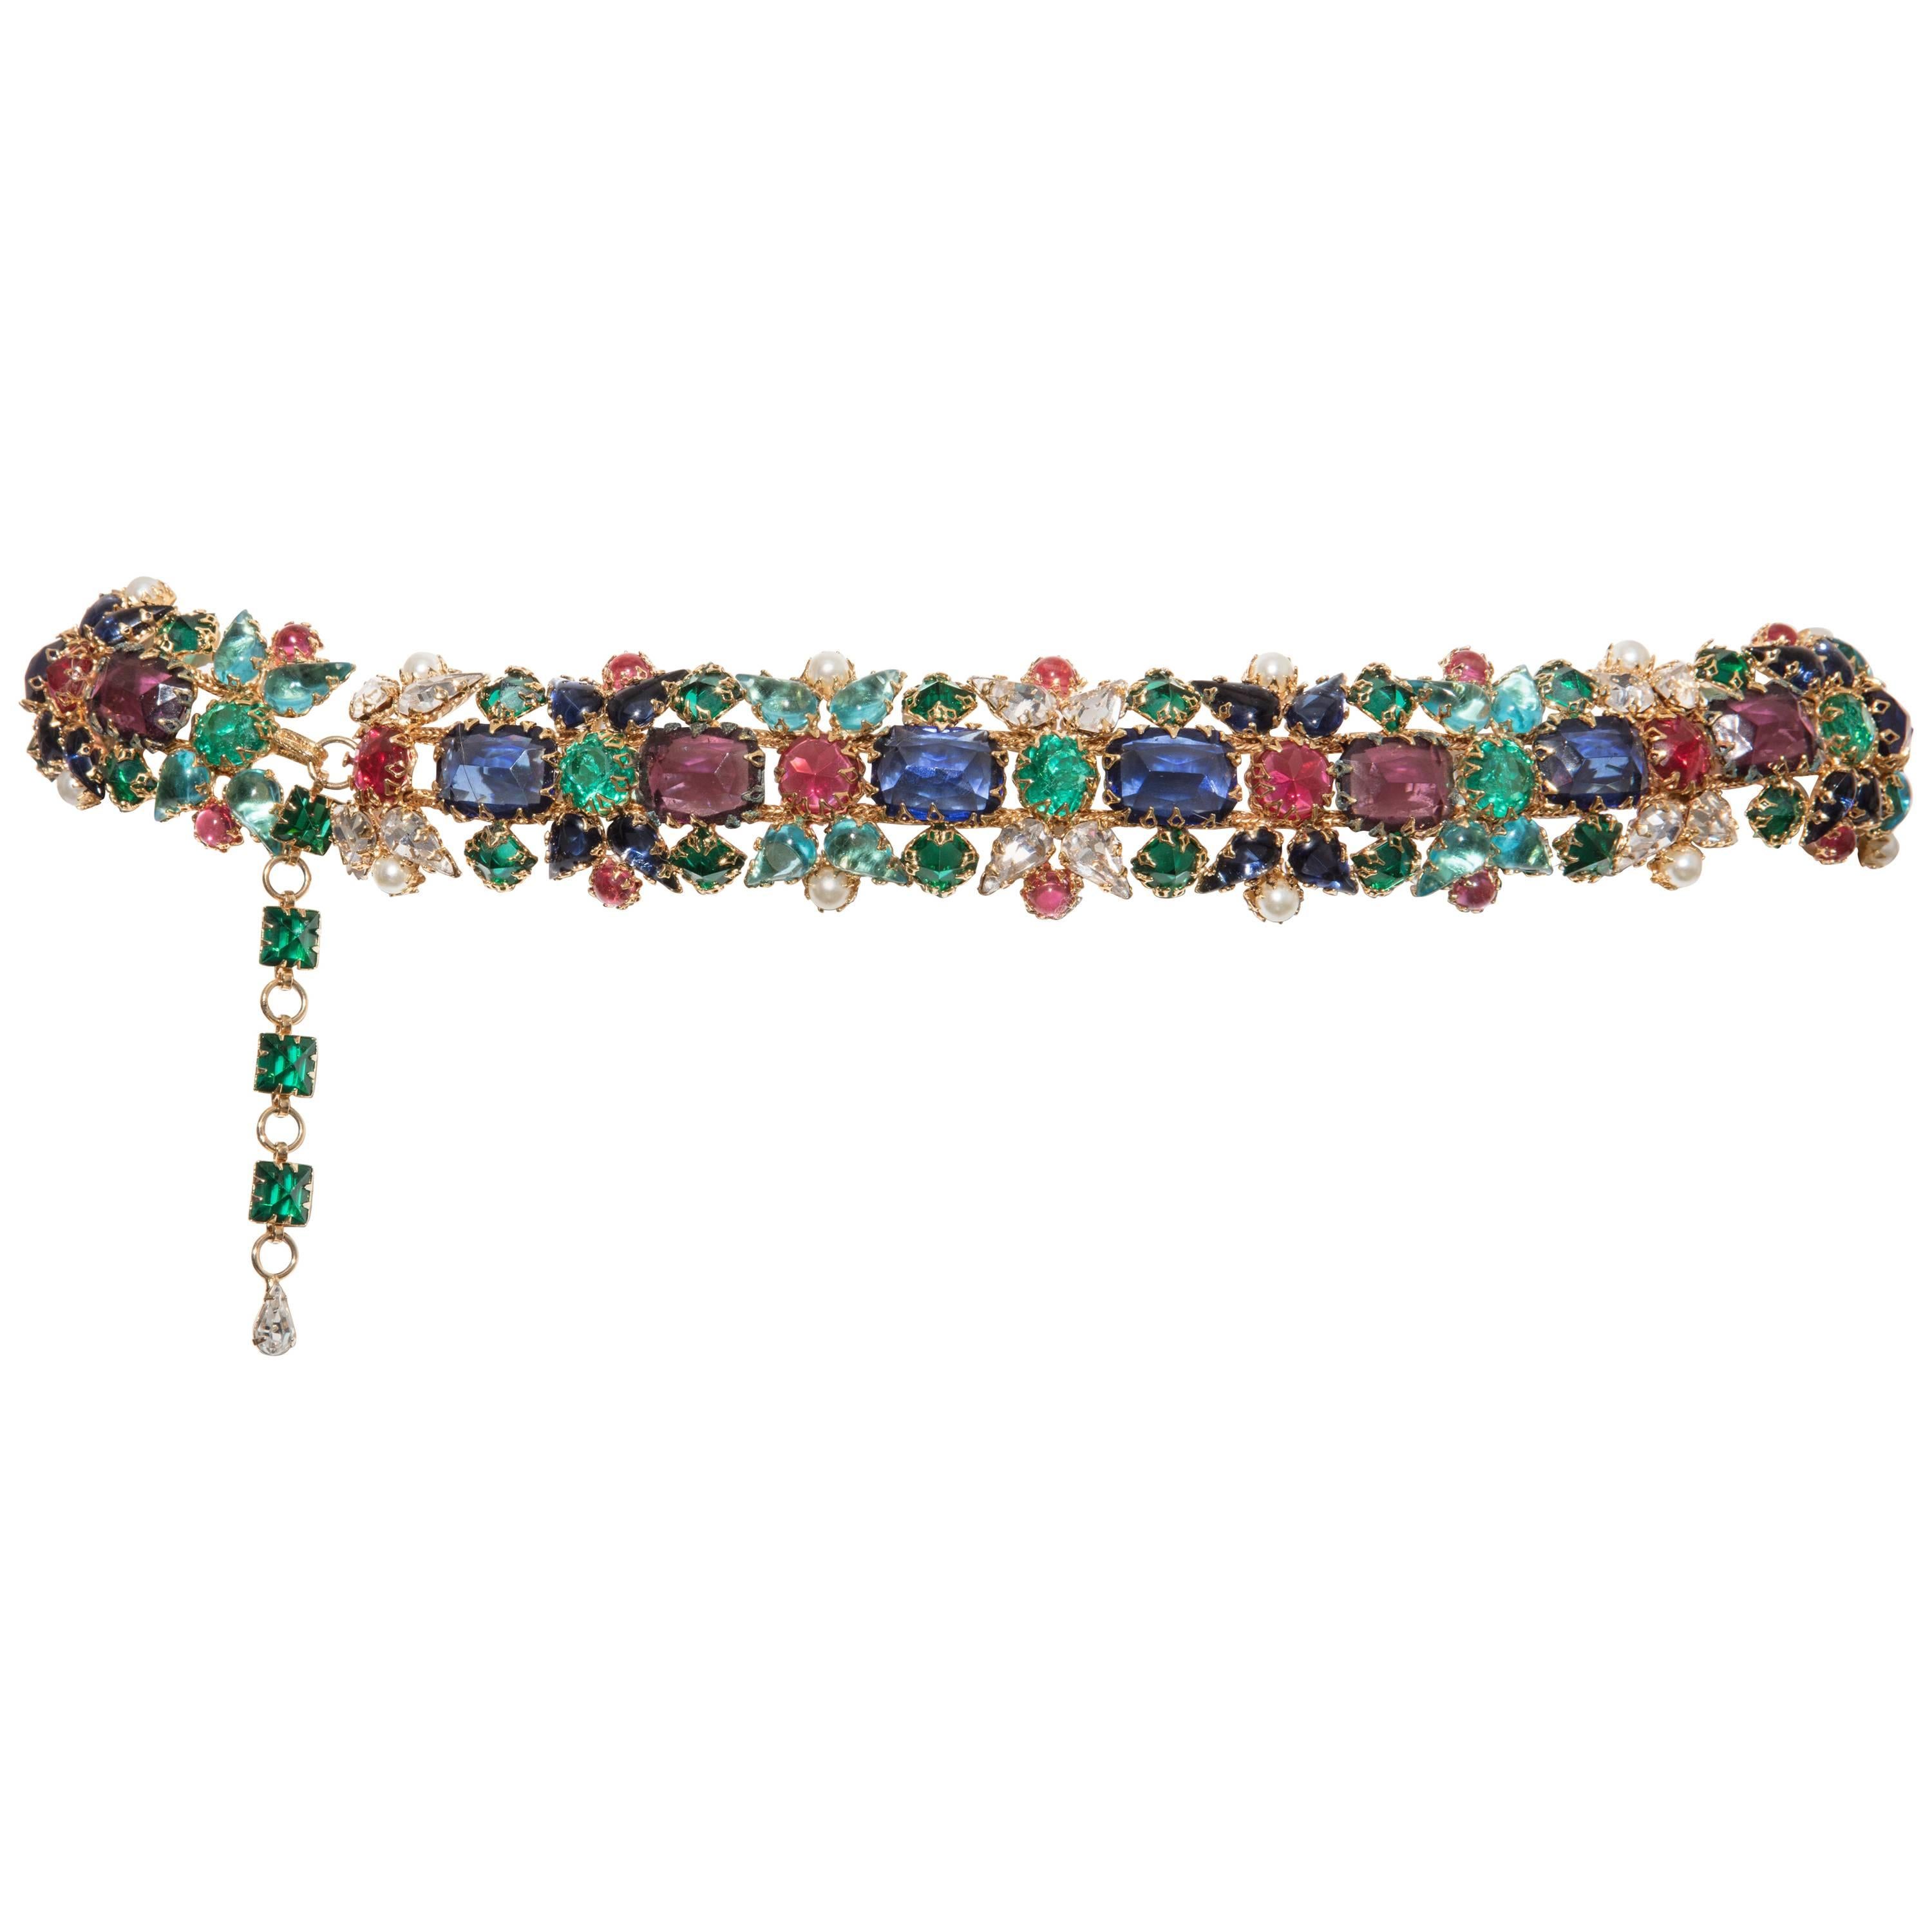 Multifaceted Multicolored Jeweled With Pearls Evening Belt